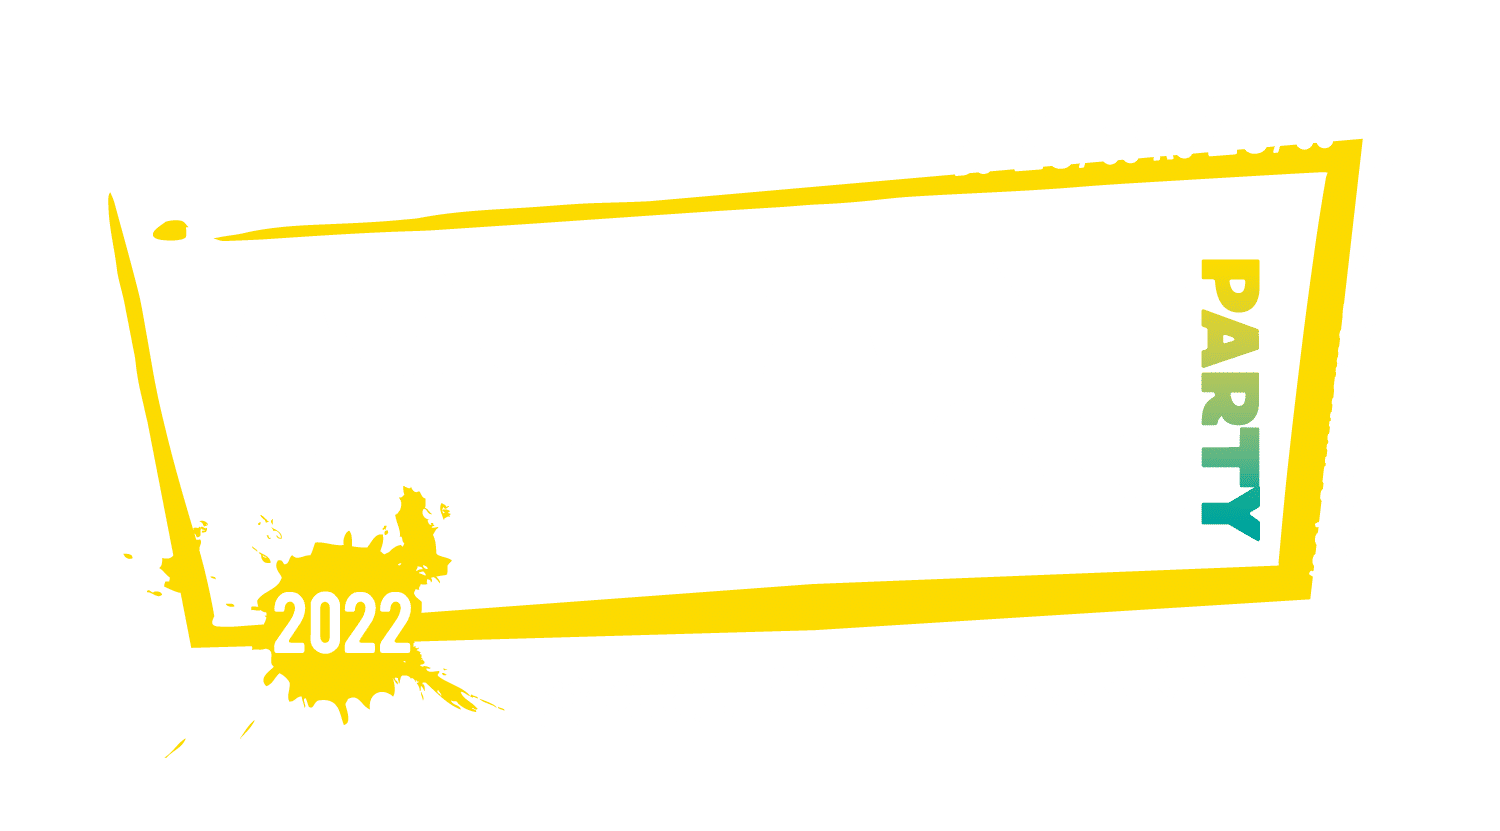 Aquitaine Fitness Party 2022 ☀ UCPA Bombannes ☀ "Sport, fun, nature !"